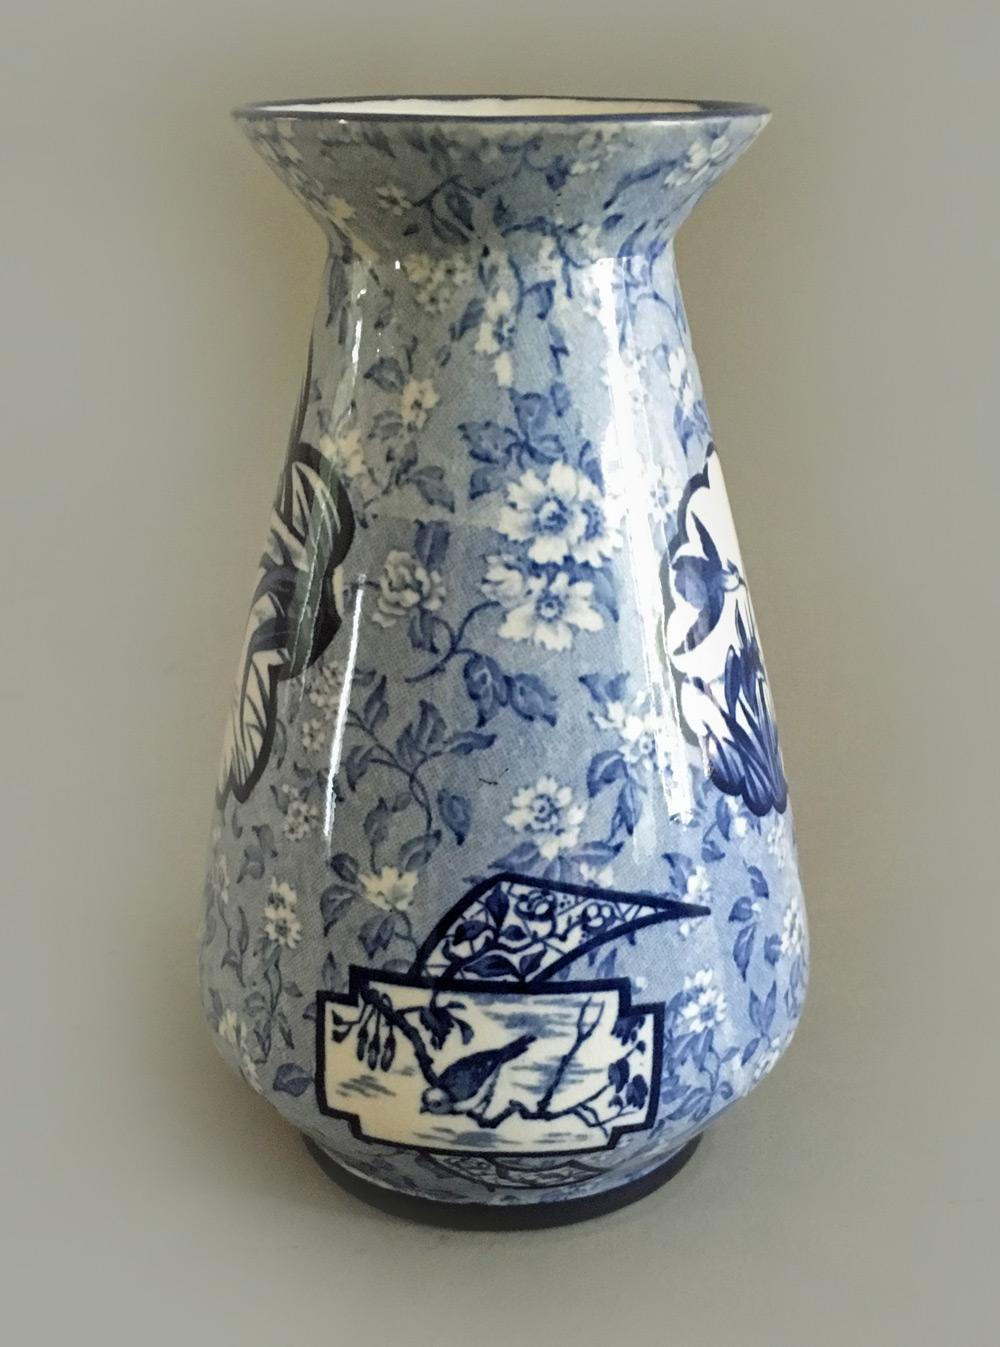 A vintage small blue and white Burleigh (Burgess & Leigh) Burslem vase, the baluster shaped vase and flared neck decorated with several cartouche shapes enclosing birds against a pale blue calico background. The bottom marked Burleigh Ware, Burslem